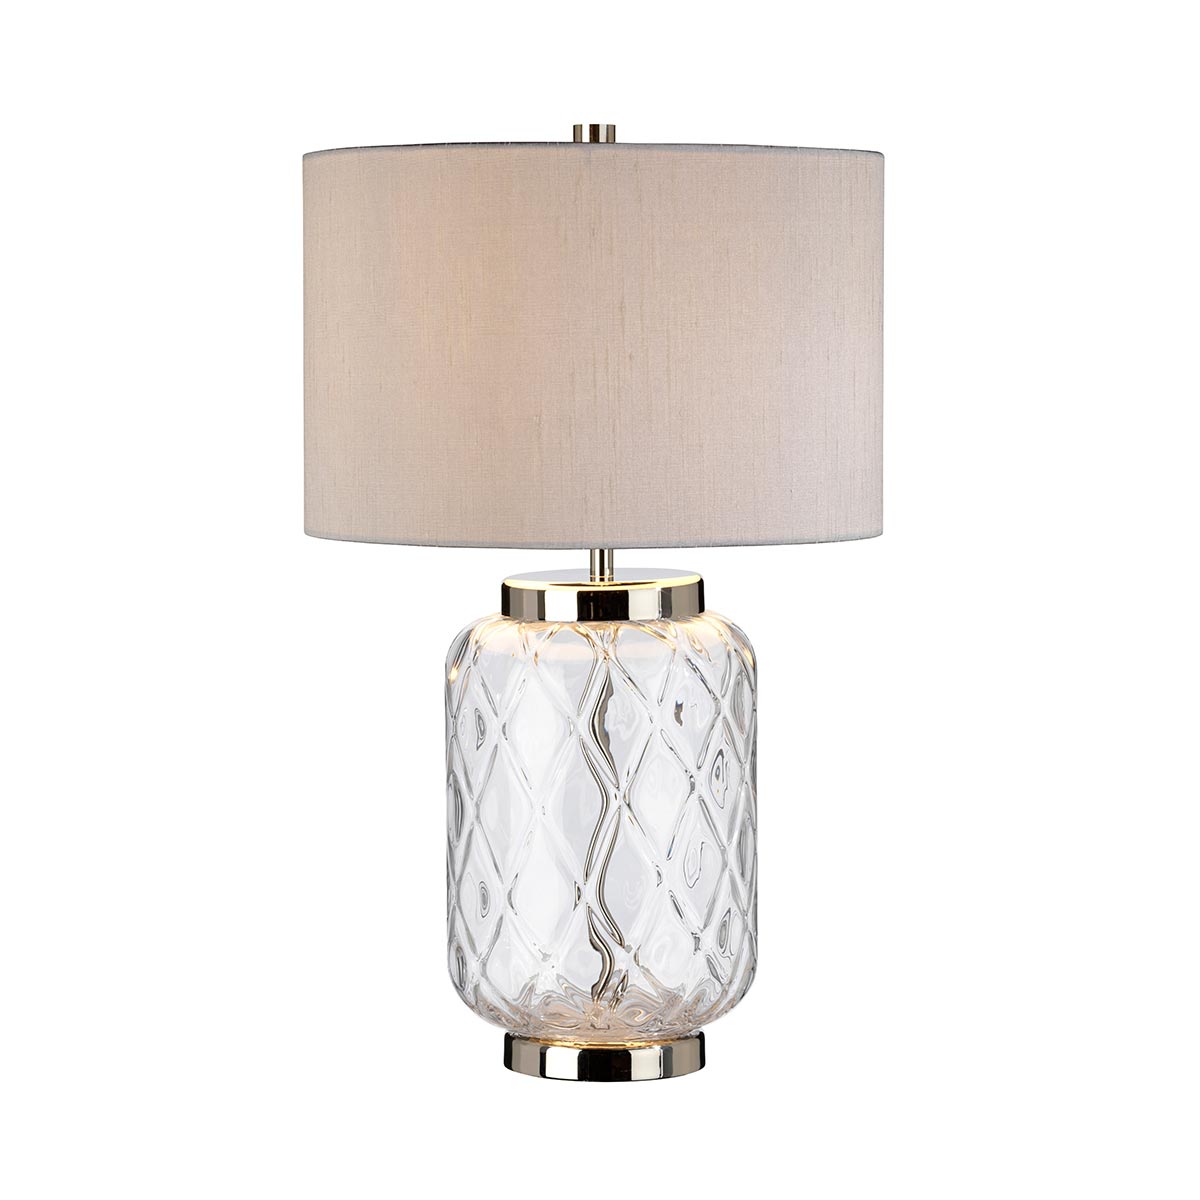 Sola Small 1 Light Clear Glass Table Lamp Polished Nickel Silver Shade